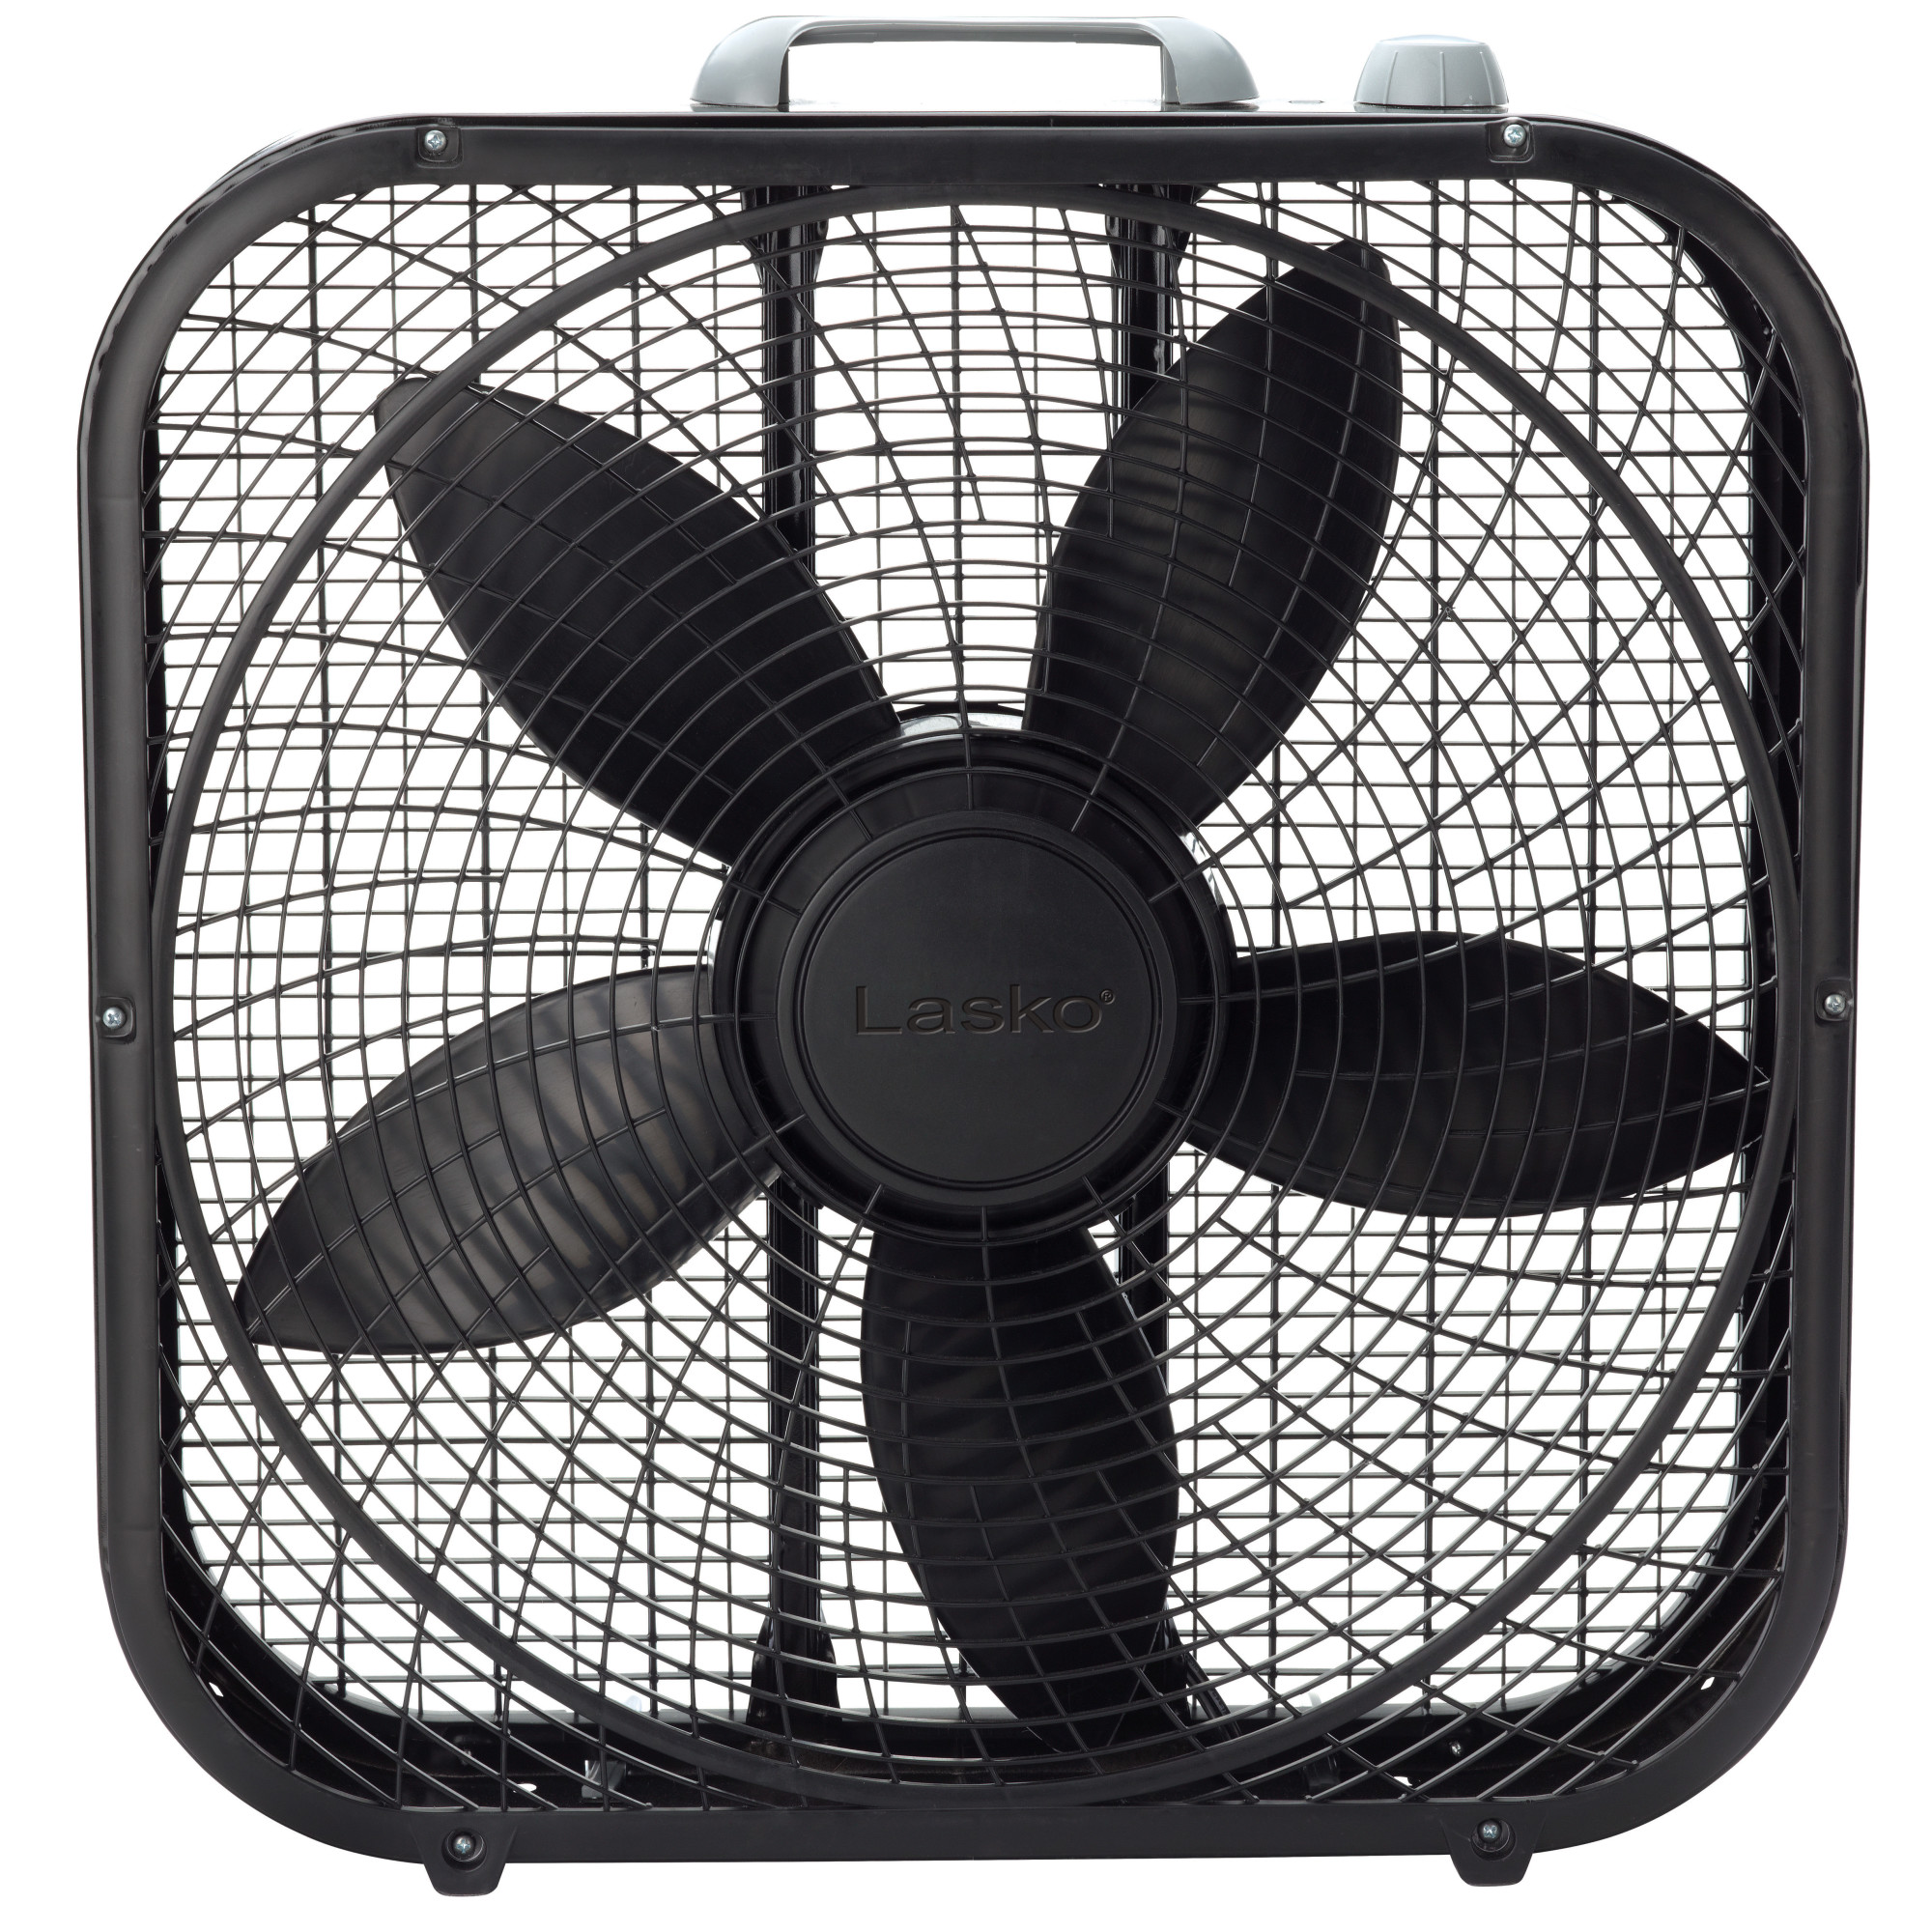 Lasko Cool Colors 20" Weather Resistant Box Fan, with 3-Speeds, 22" H,  Black, B20301, New - image 1 of 5